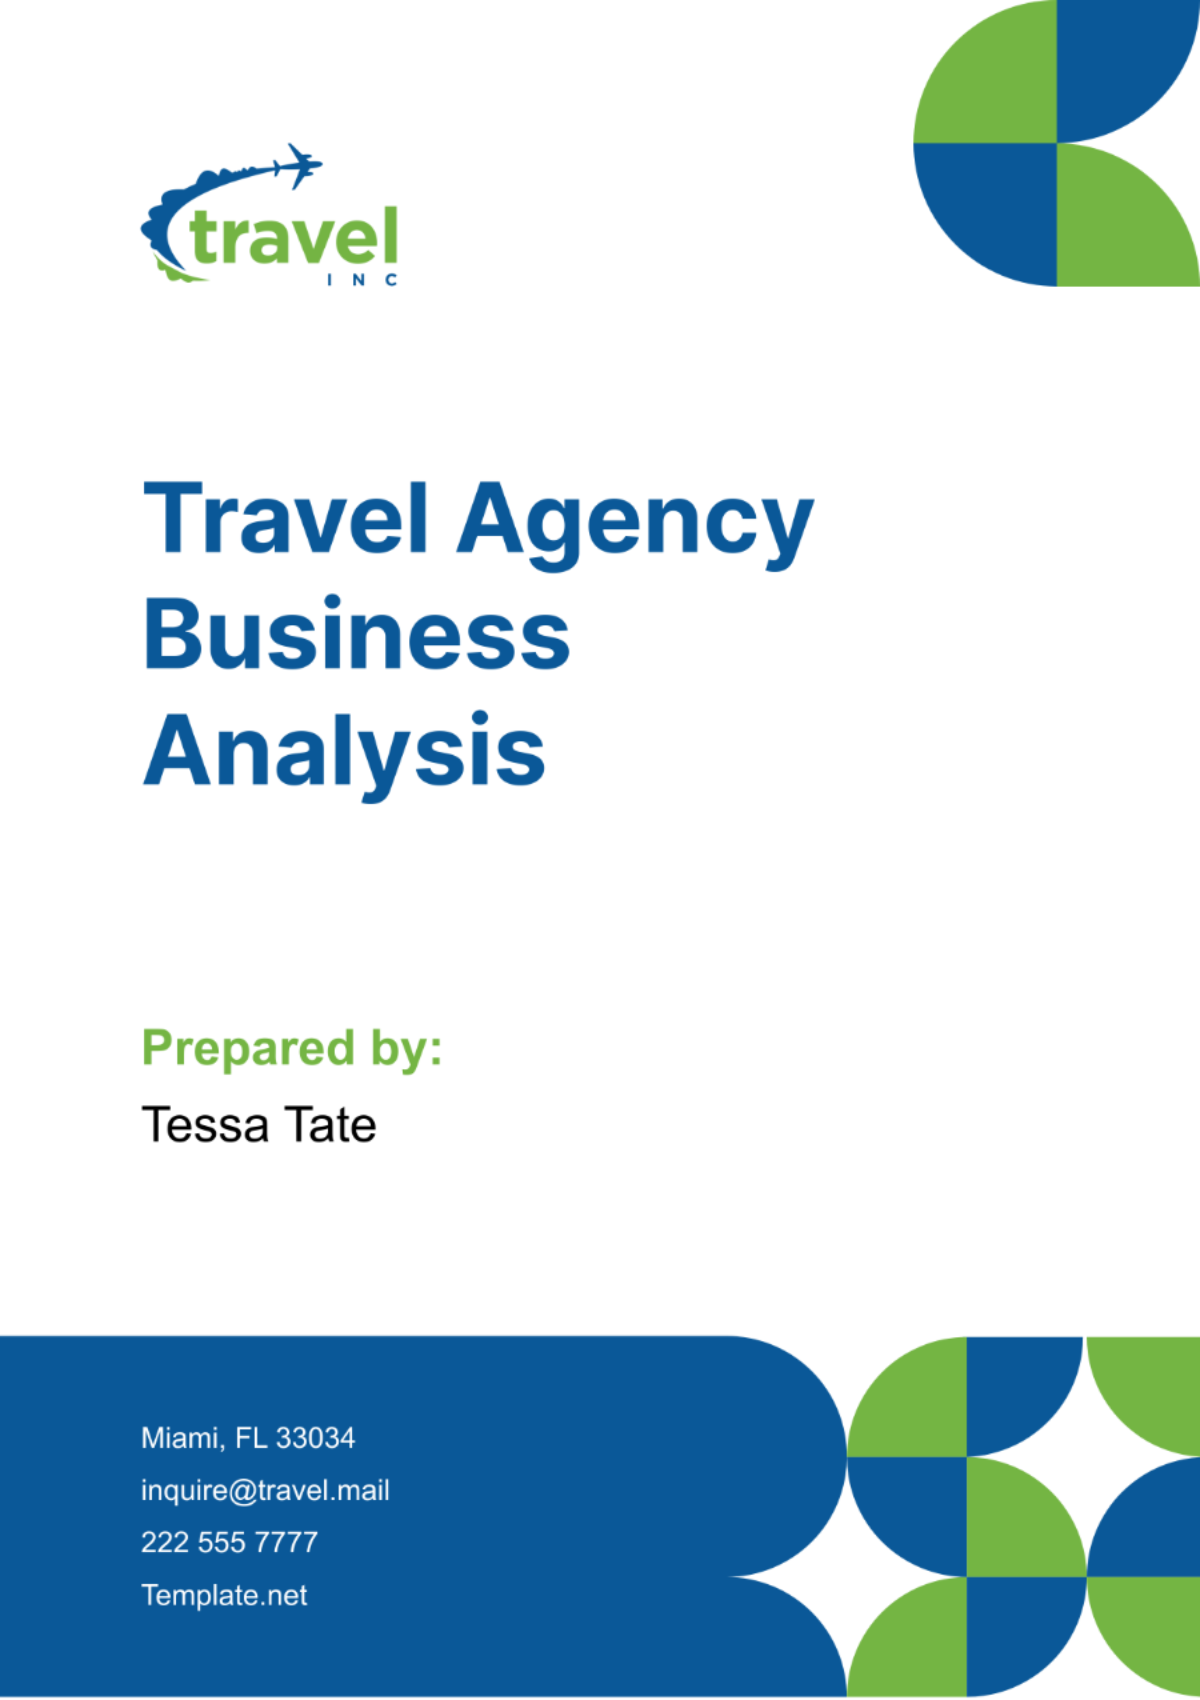 Travel Agency Business Analysis Template